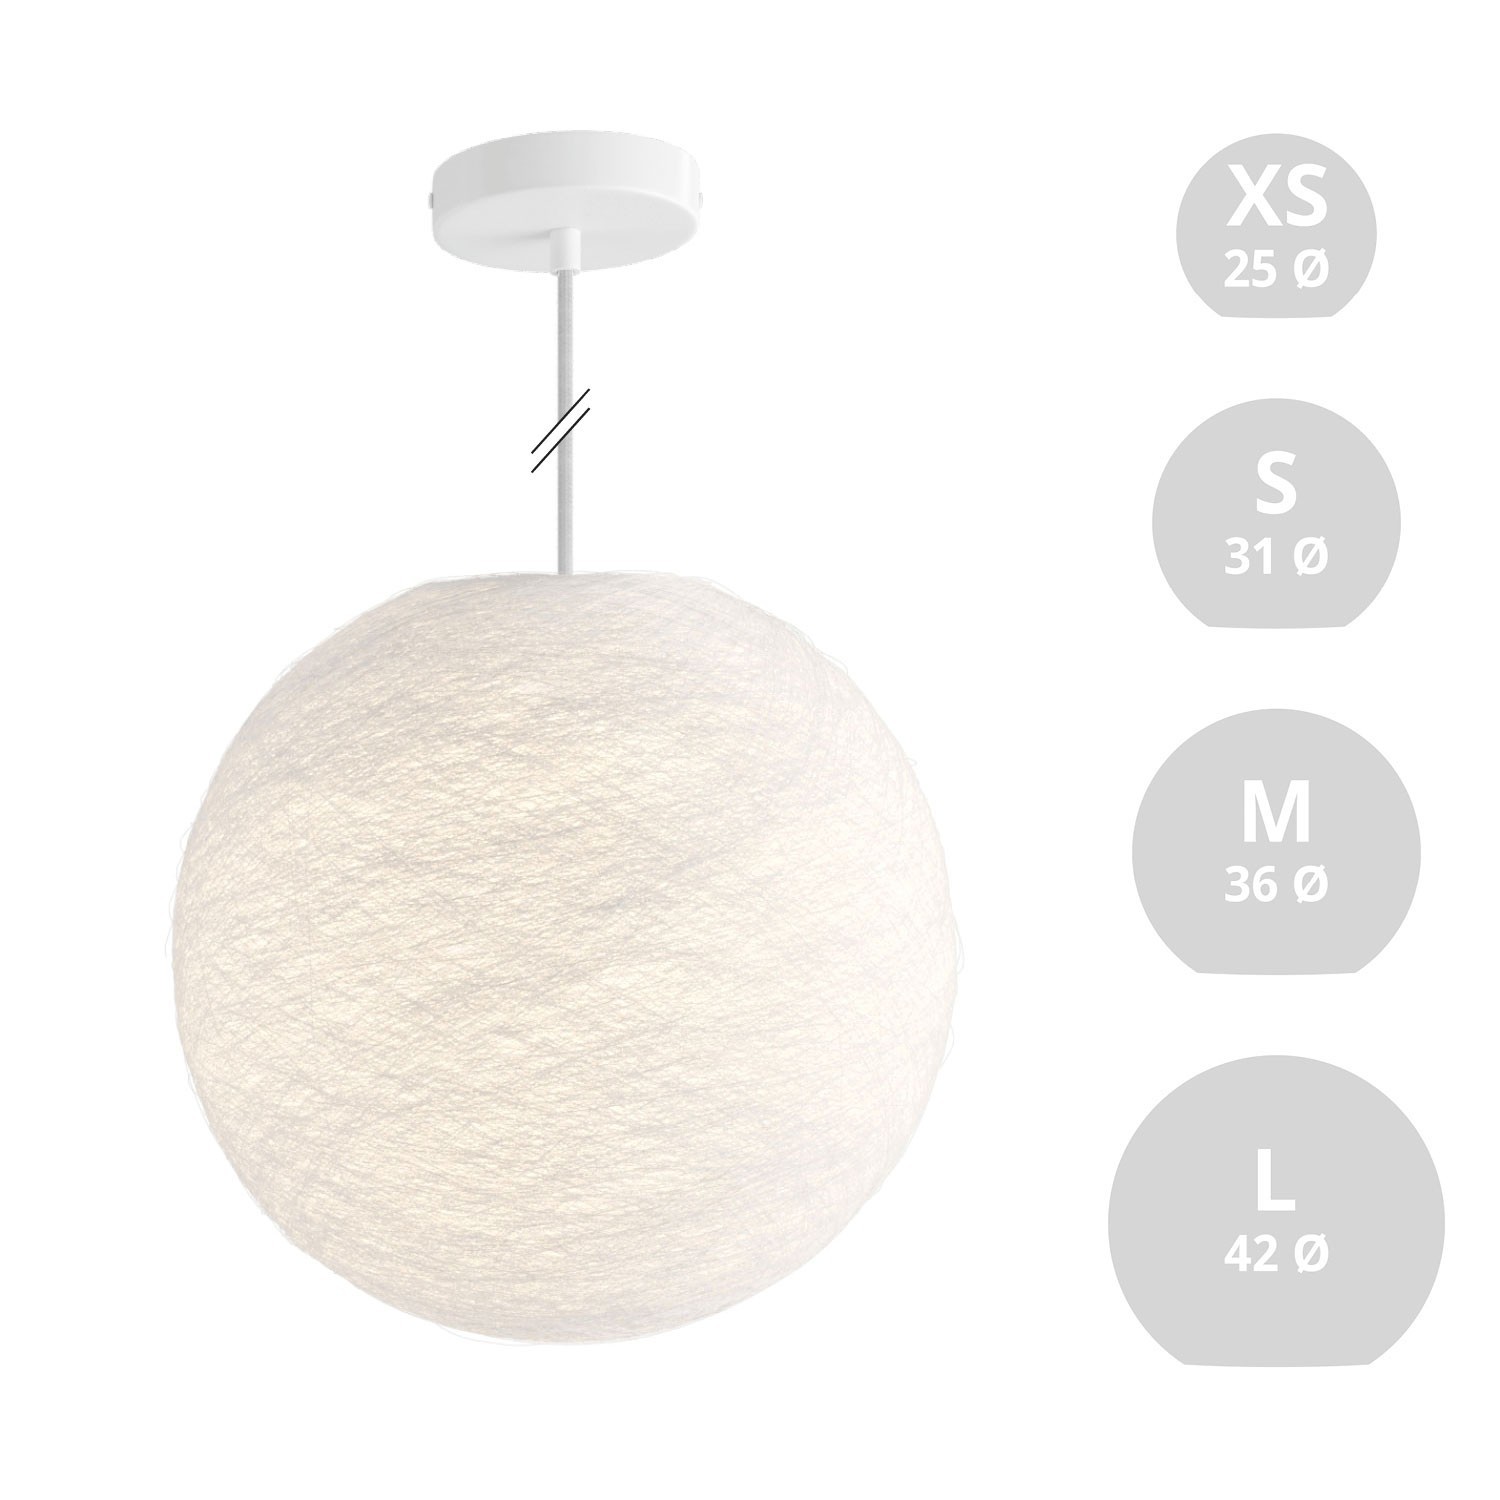 Suspension Lamp with Sphere Lampshade